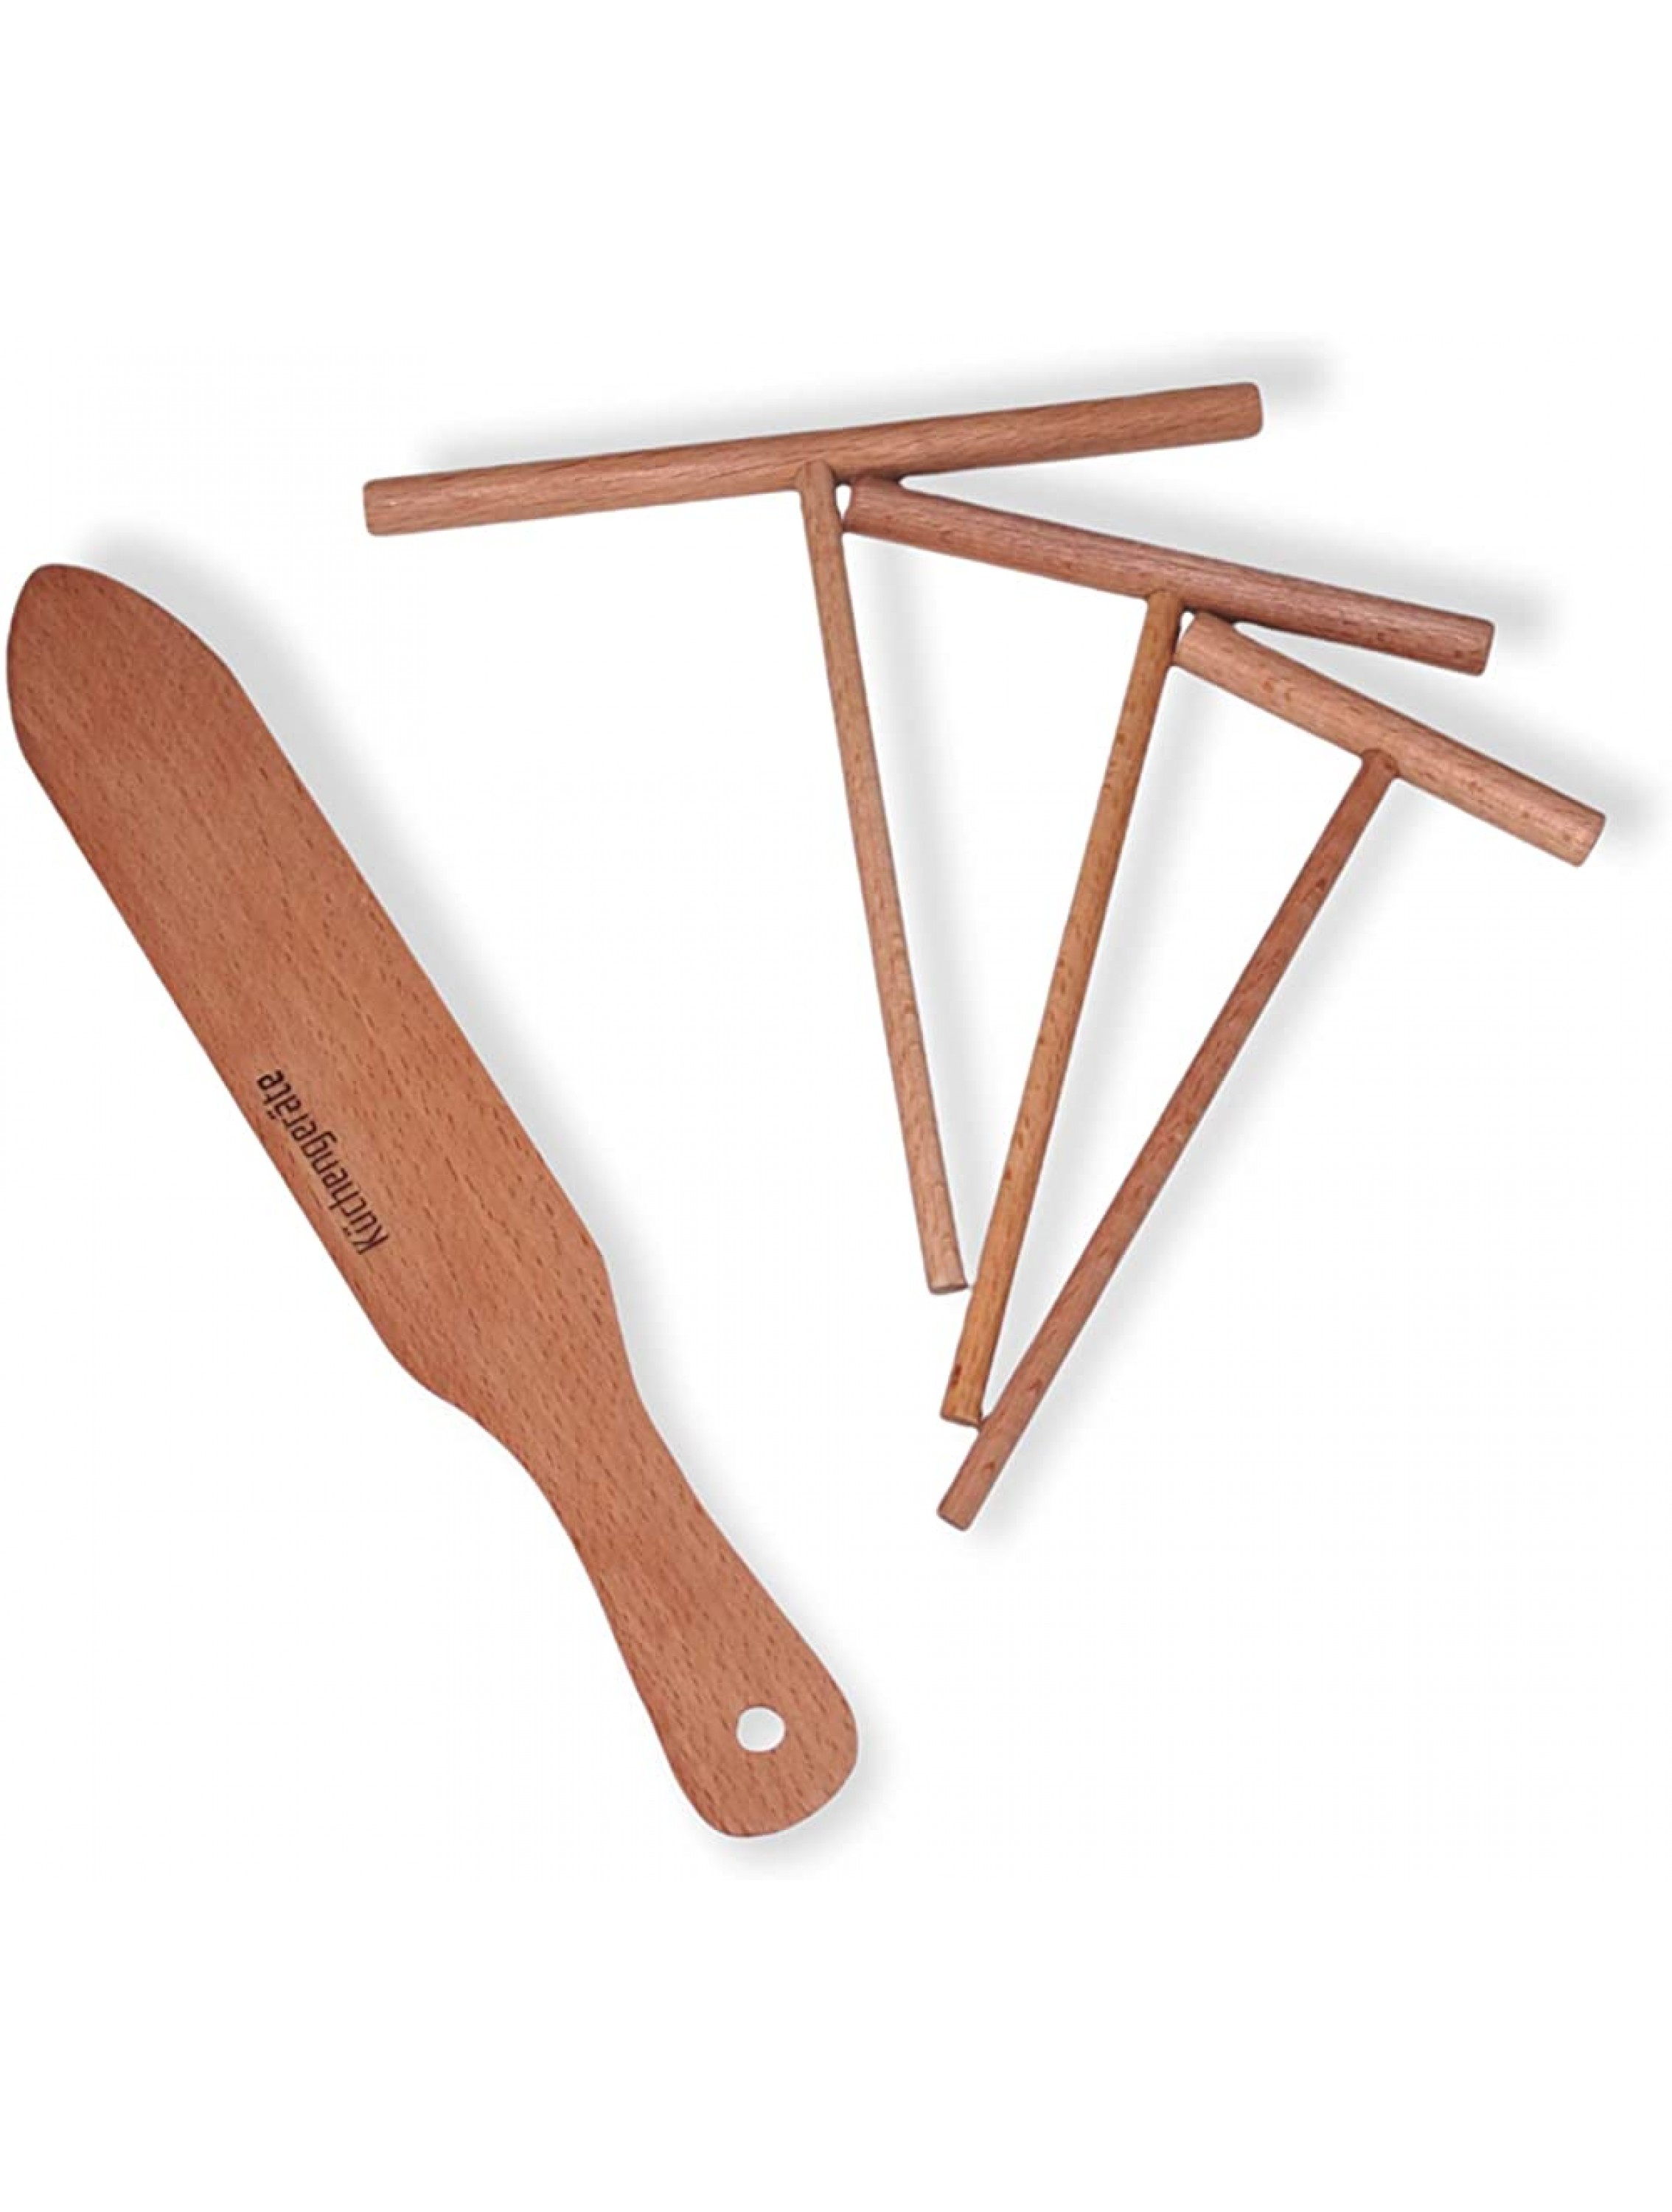 Artul Crepe Spreader and Spatula 4 Set-12 in Crepe Spatula 3.5,5,7 in Spreaders Kit-Creperie Pancake Maker-all Sizes To Fit For Crepe Pans-Crepes Maker Made Of 100percent Natural Beech Wood - BGCV4S6JO